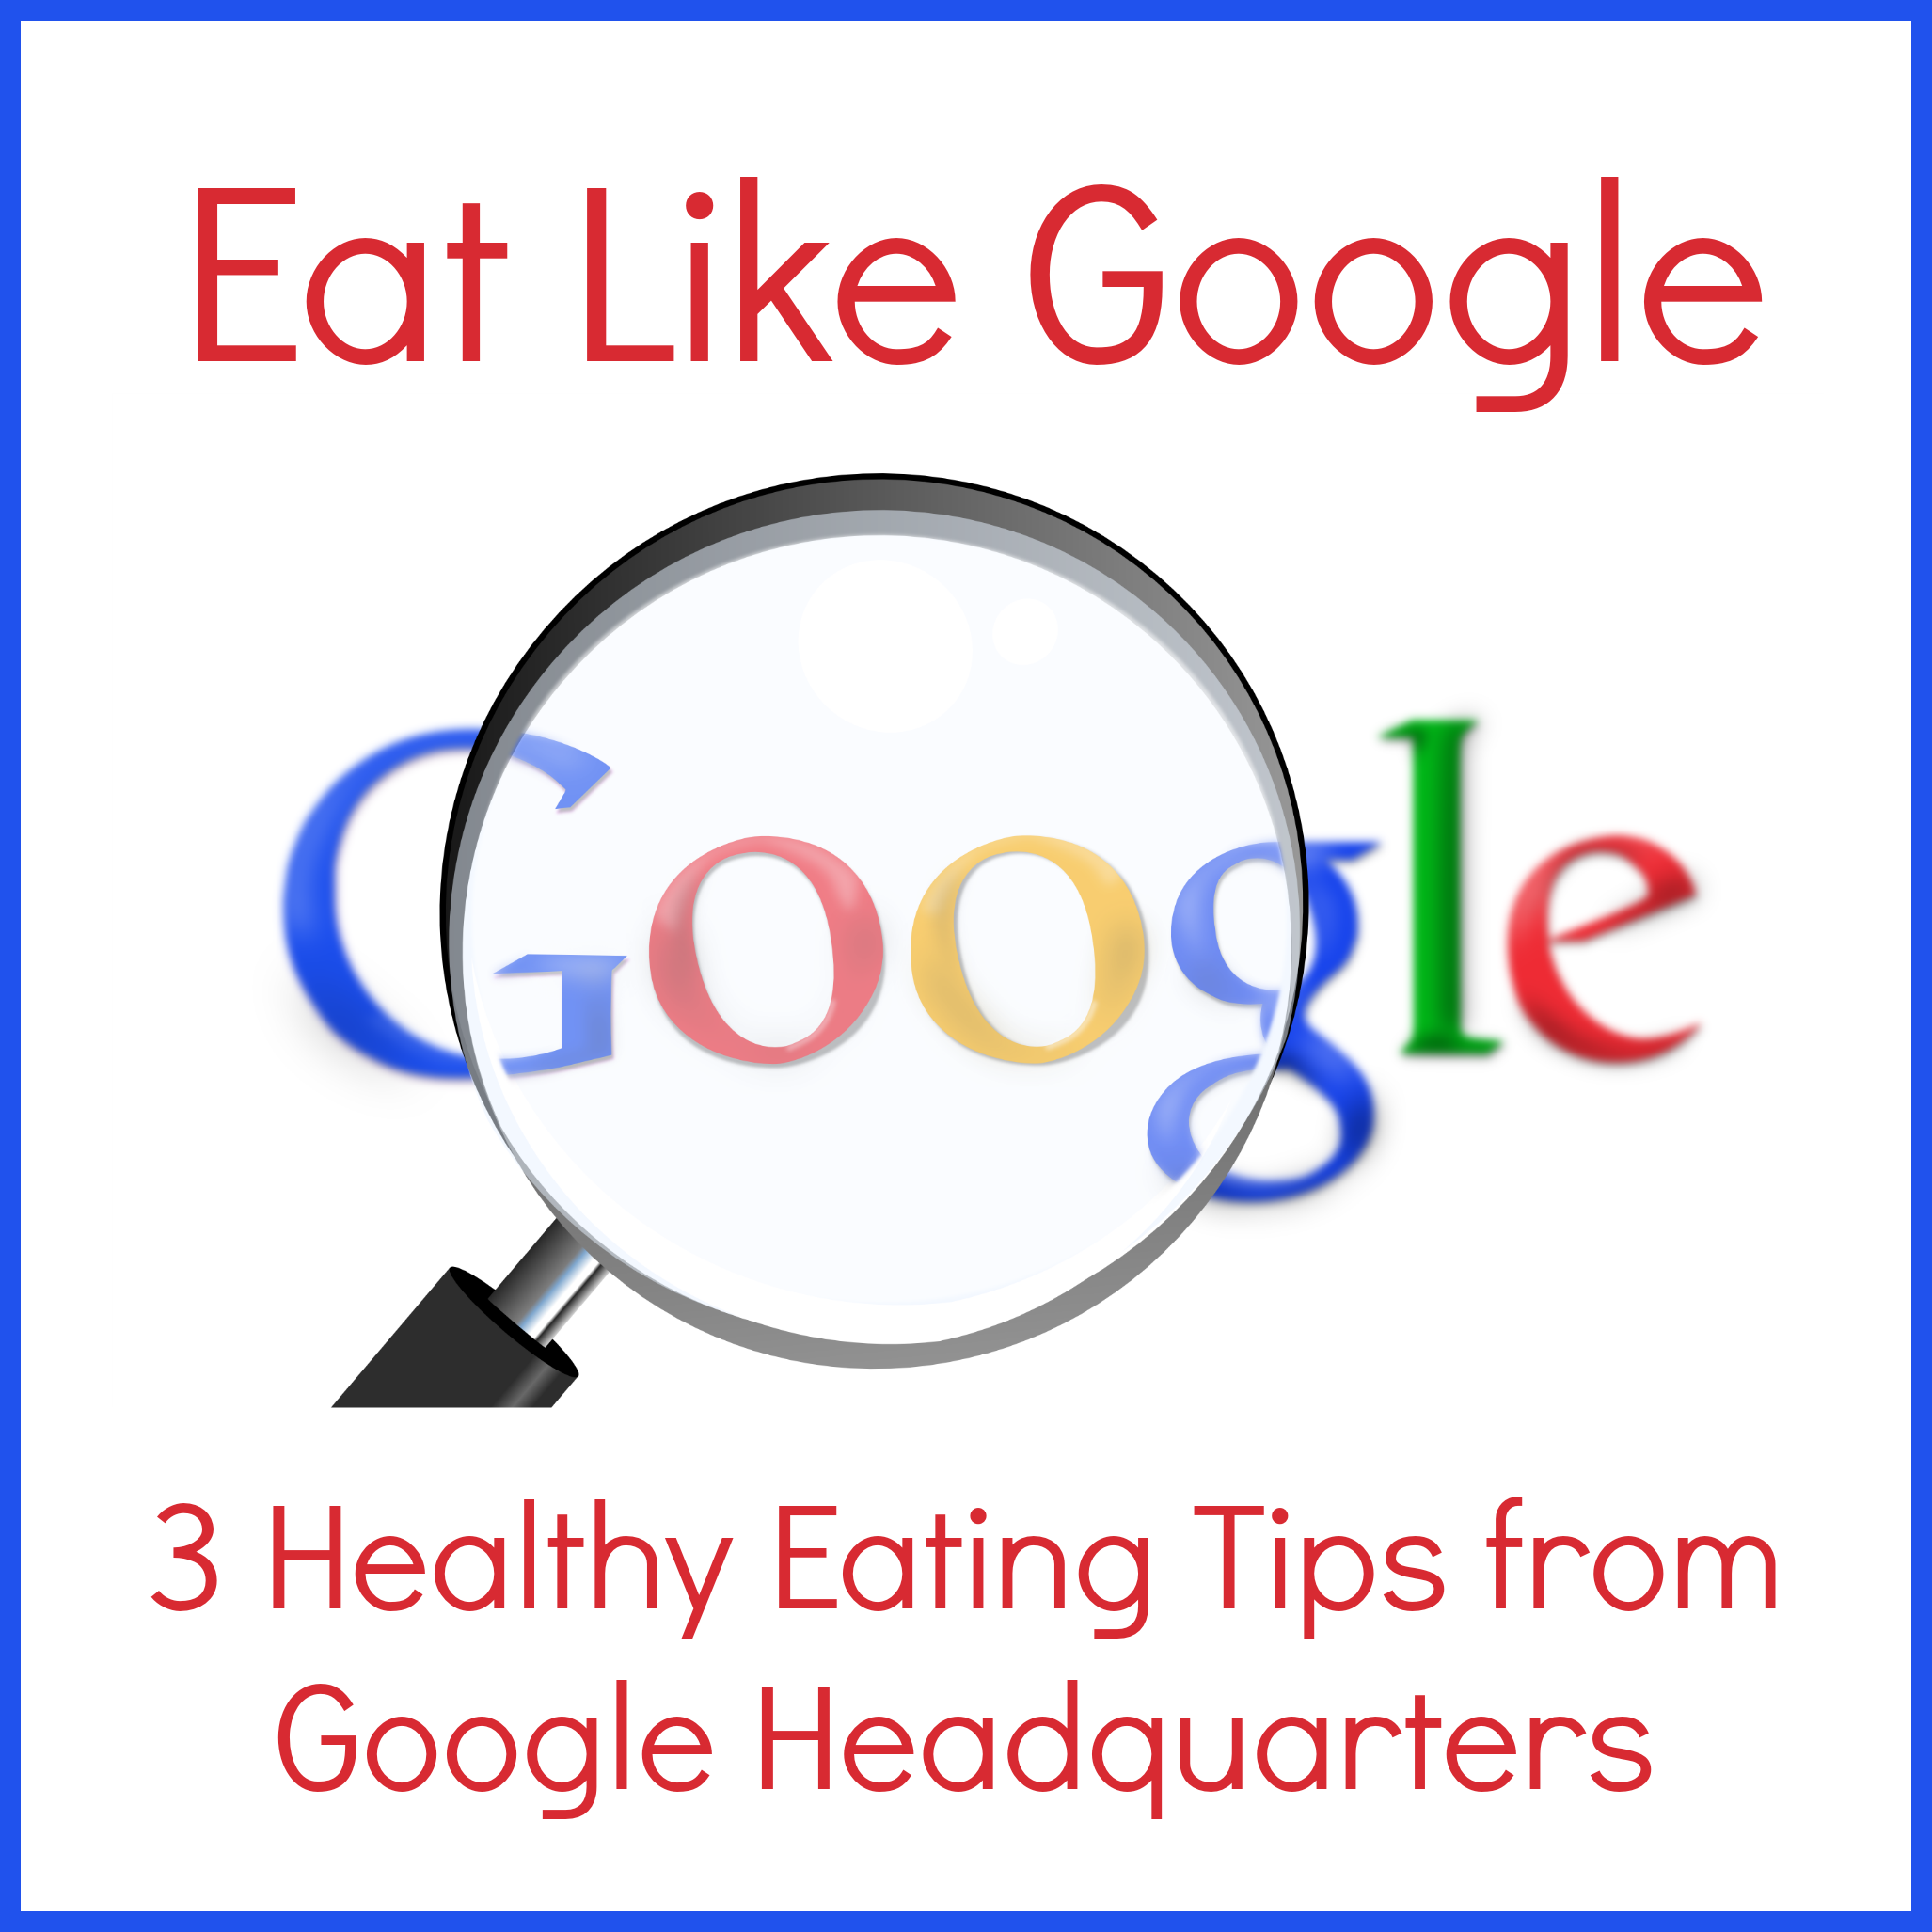 Eat Like Google: 3 Healthy Eating Tips from Google Headquarters